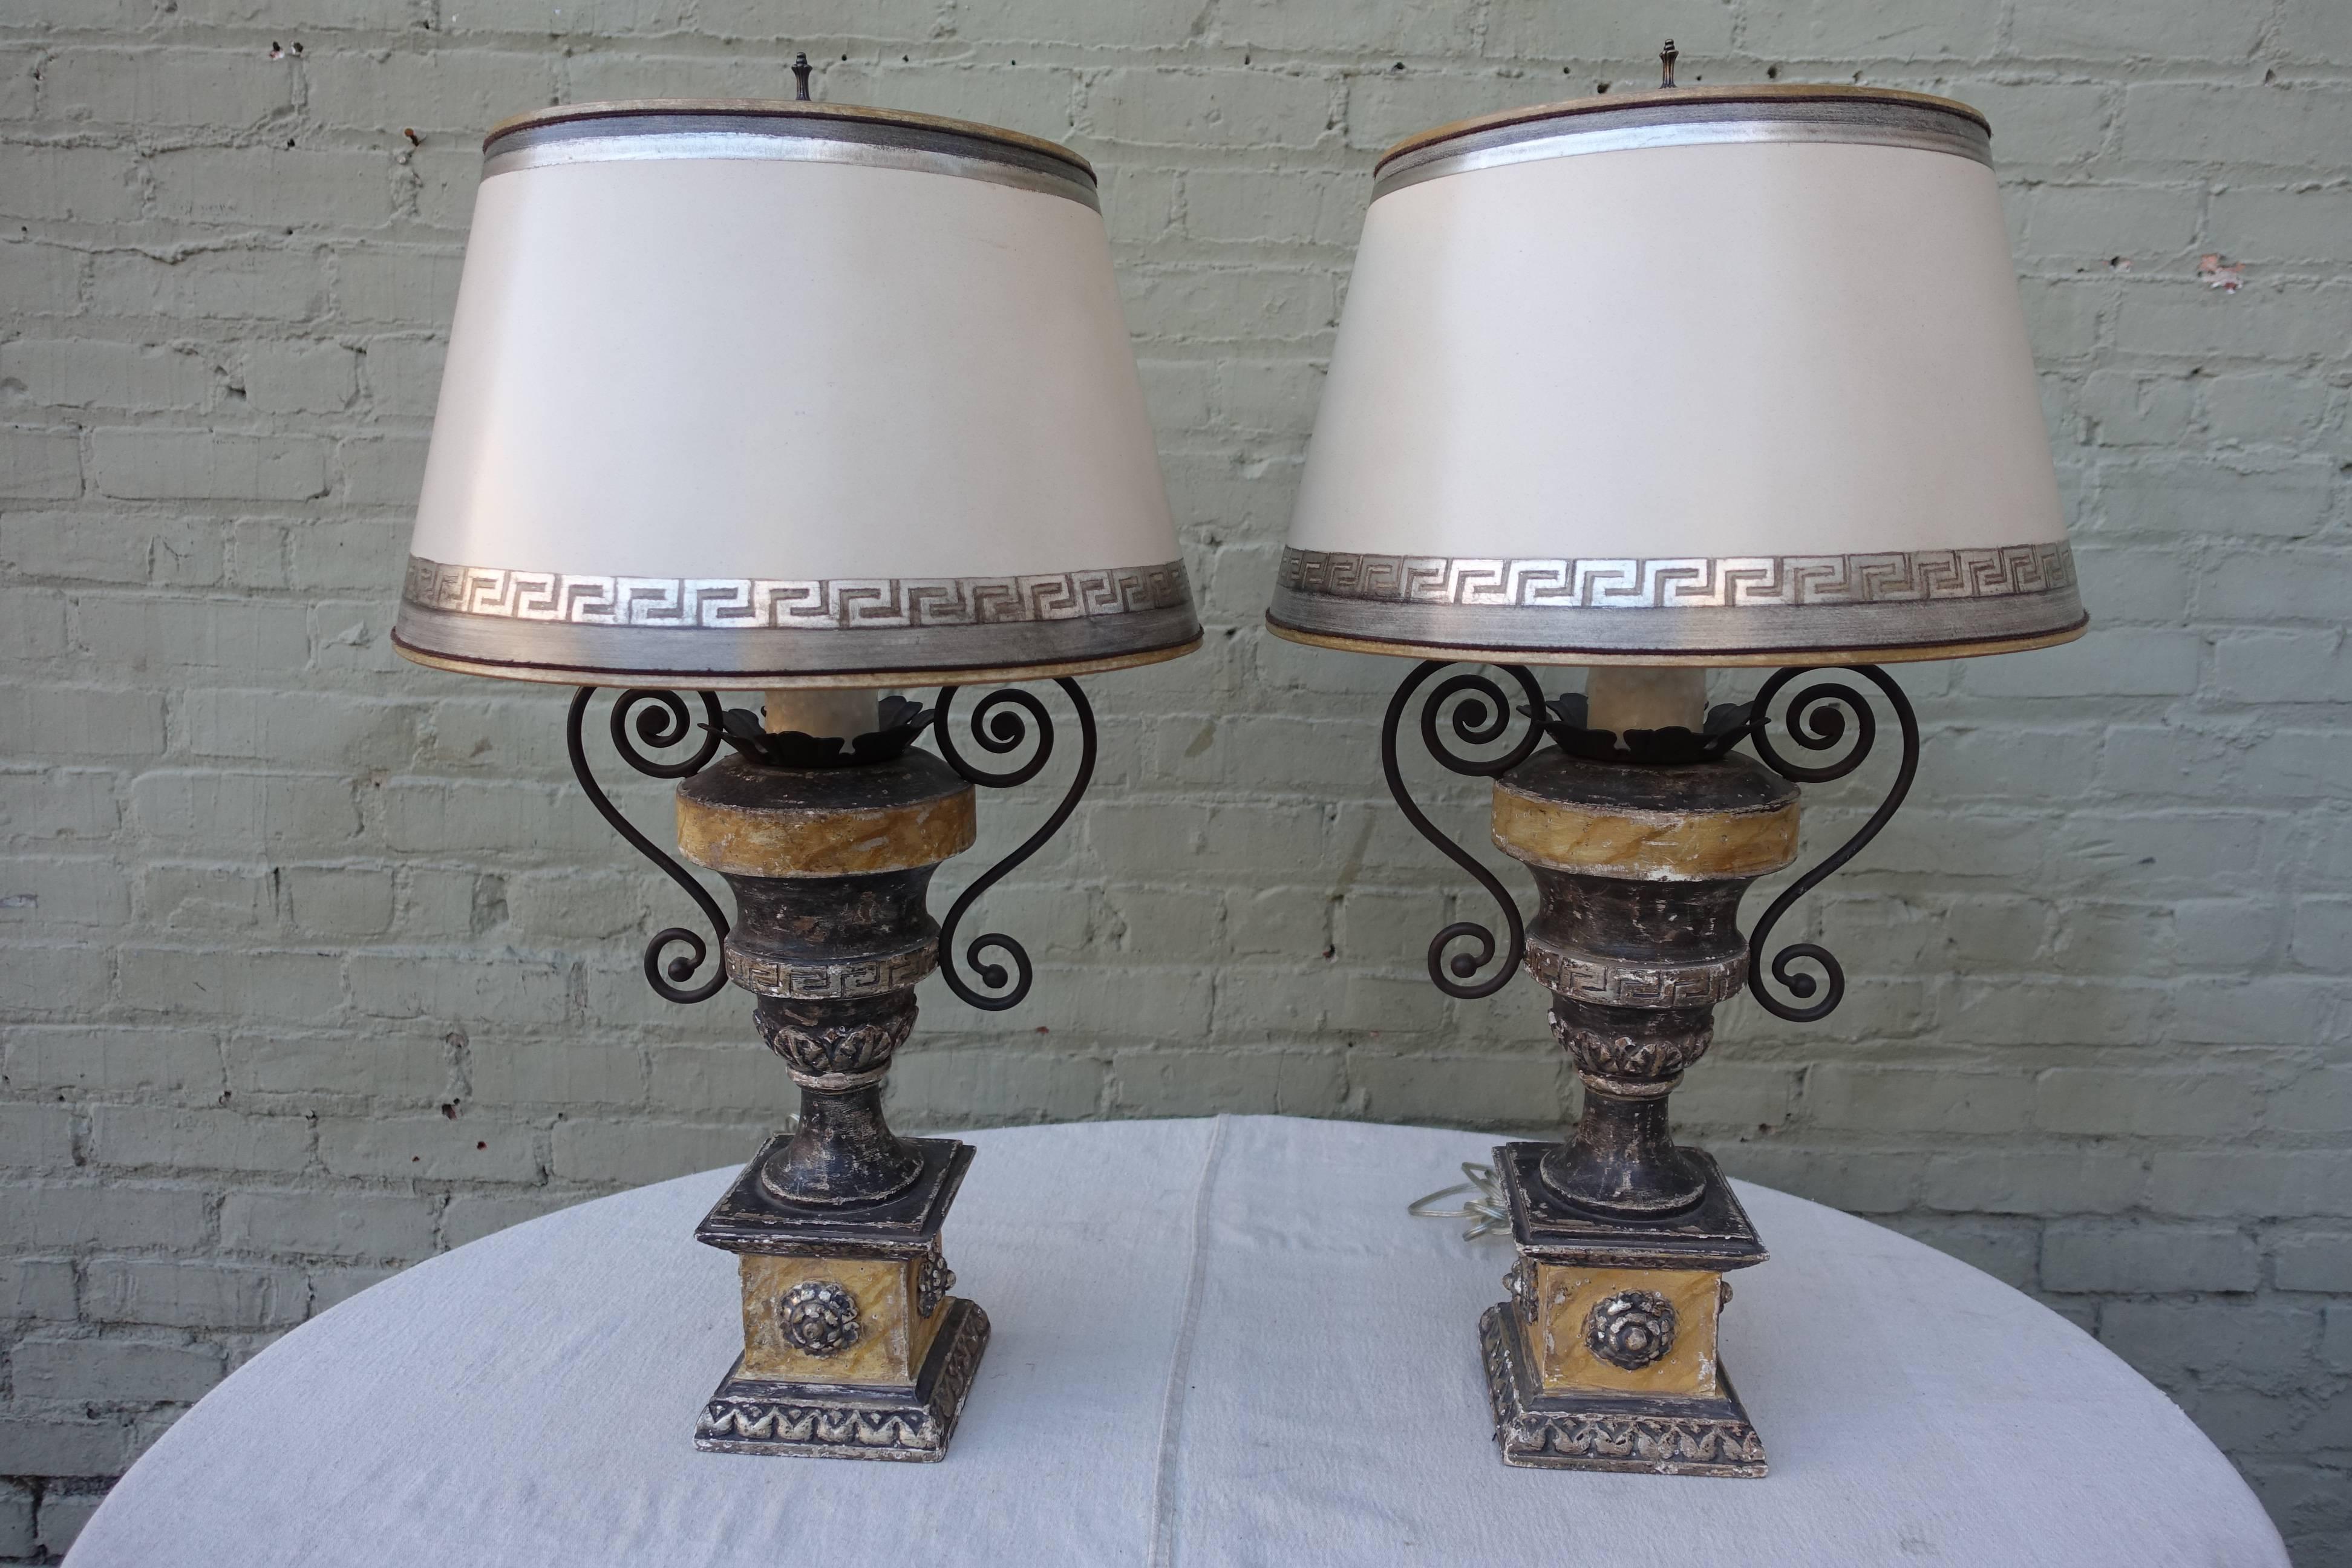 Pair of neoclassical Grecian style carved painted & silver gilt urns with carved Greek key design. The urn are newly wired into lamps and crowned with custom hand-painted parchment shades. Shade size: 12" diameter. top X 17" diameter.